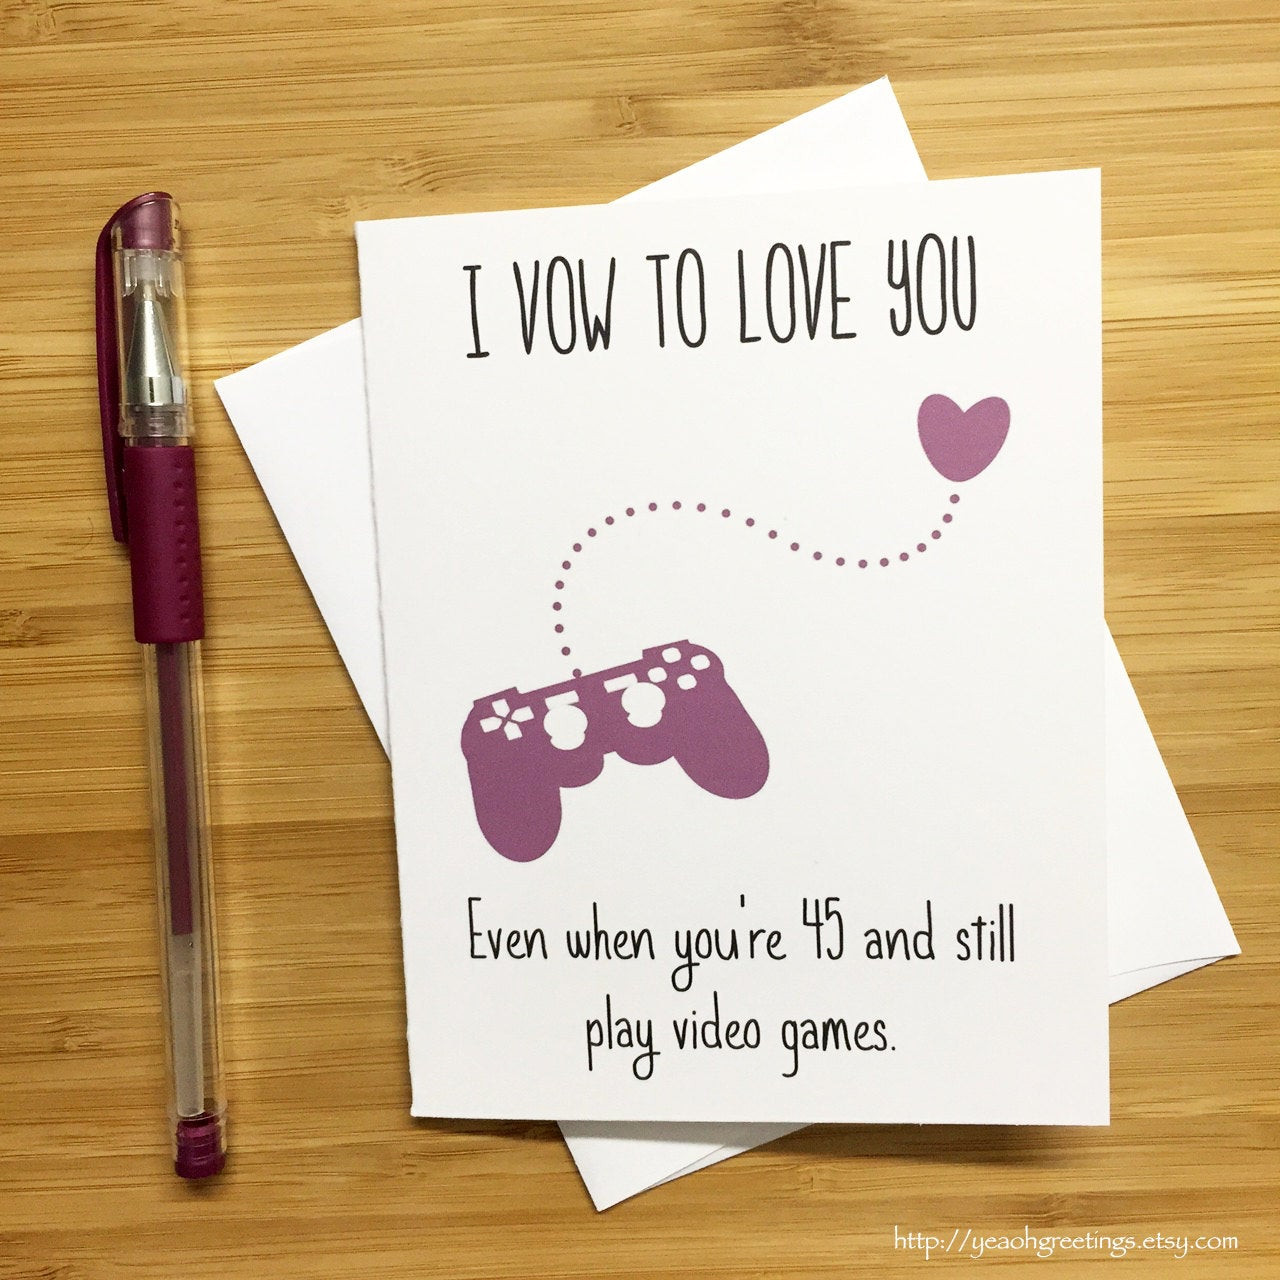 Gift Card Ideas For Couples
 Cute Love Card for Video Game Lovers Happy Anniversary Card